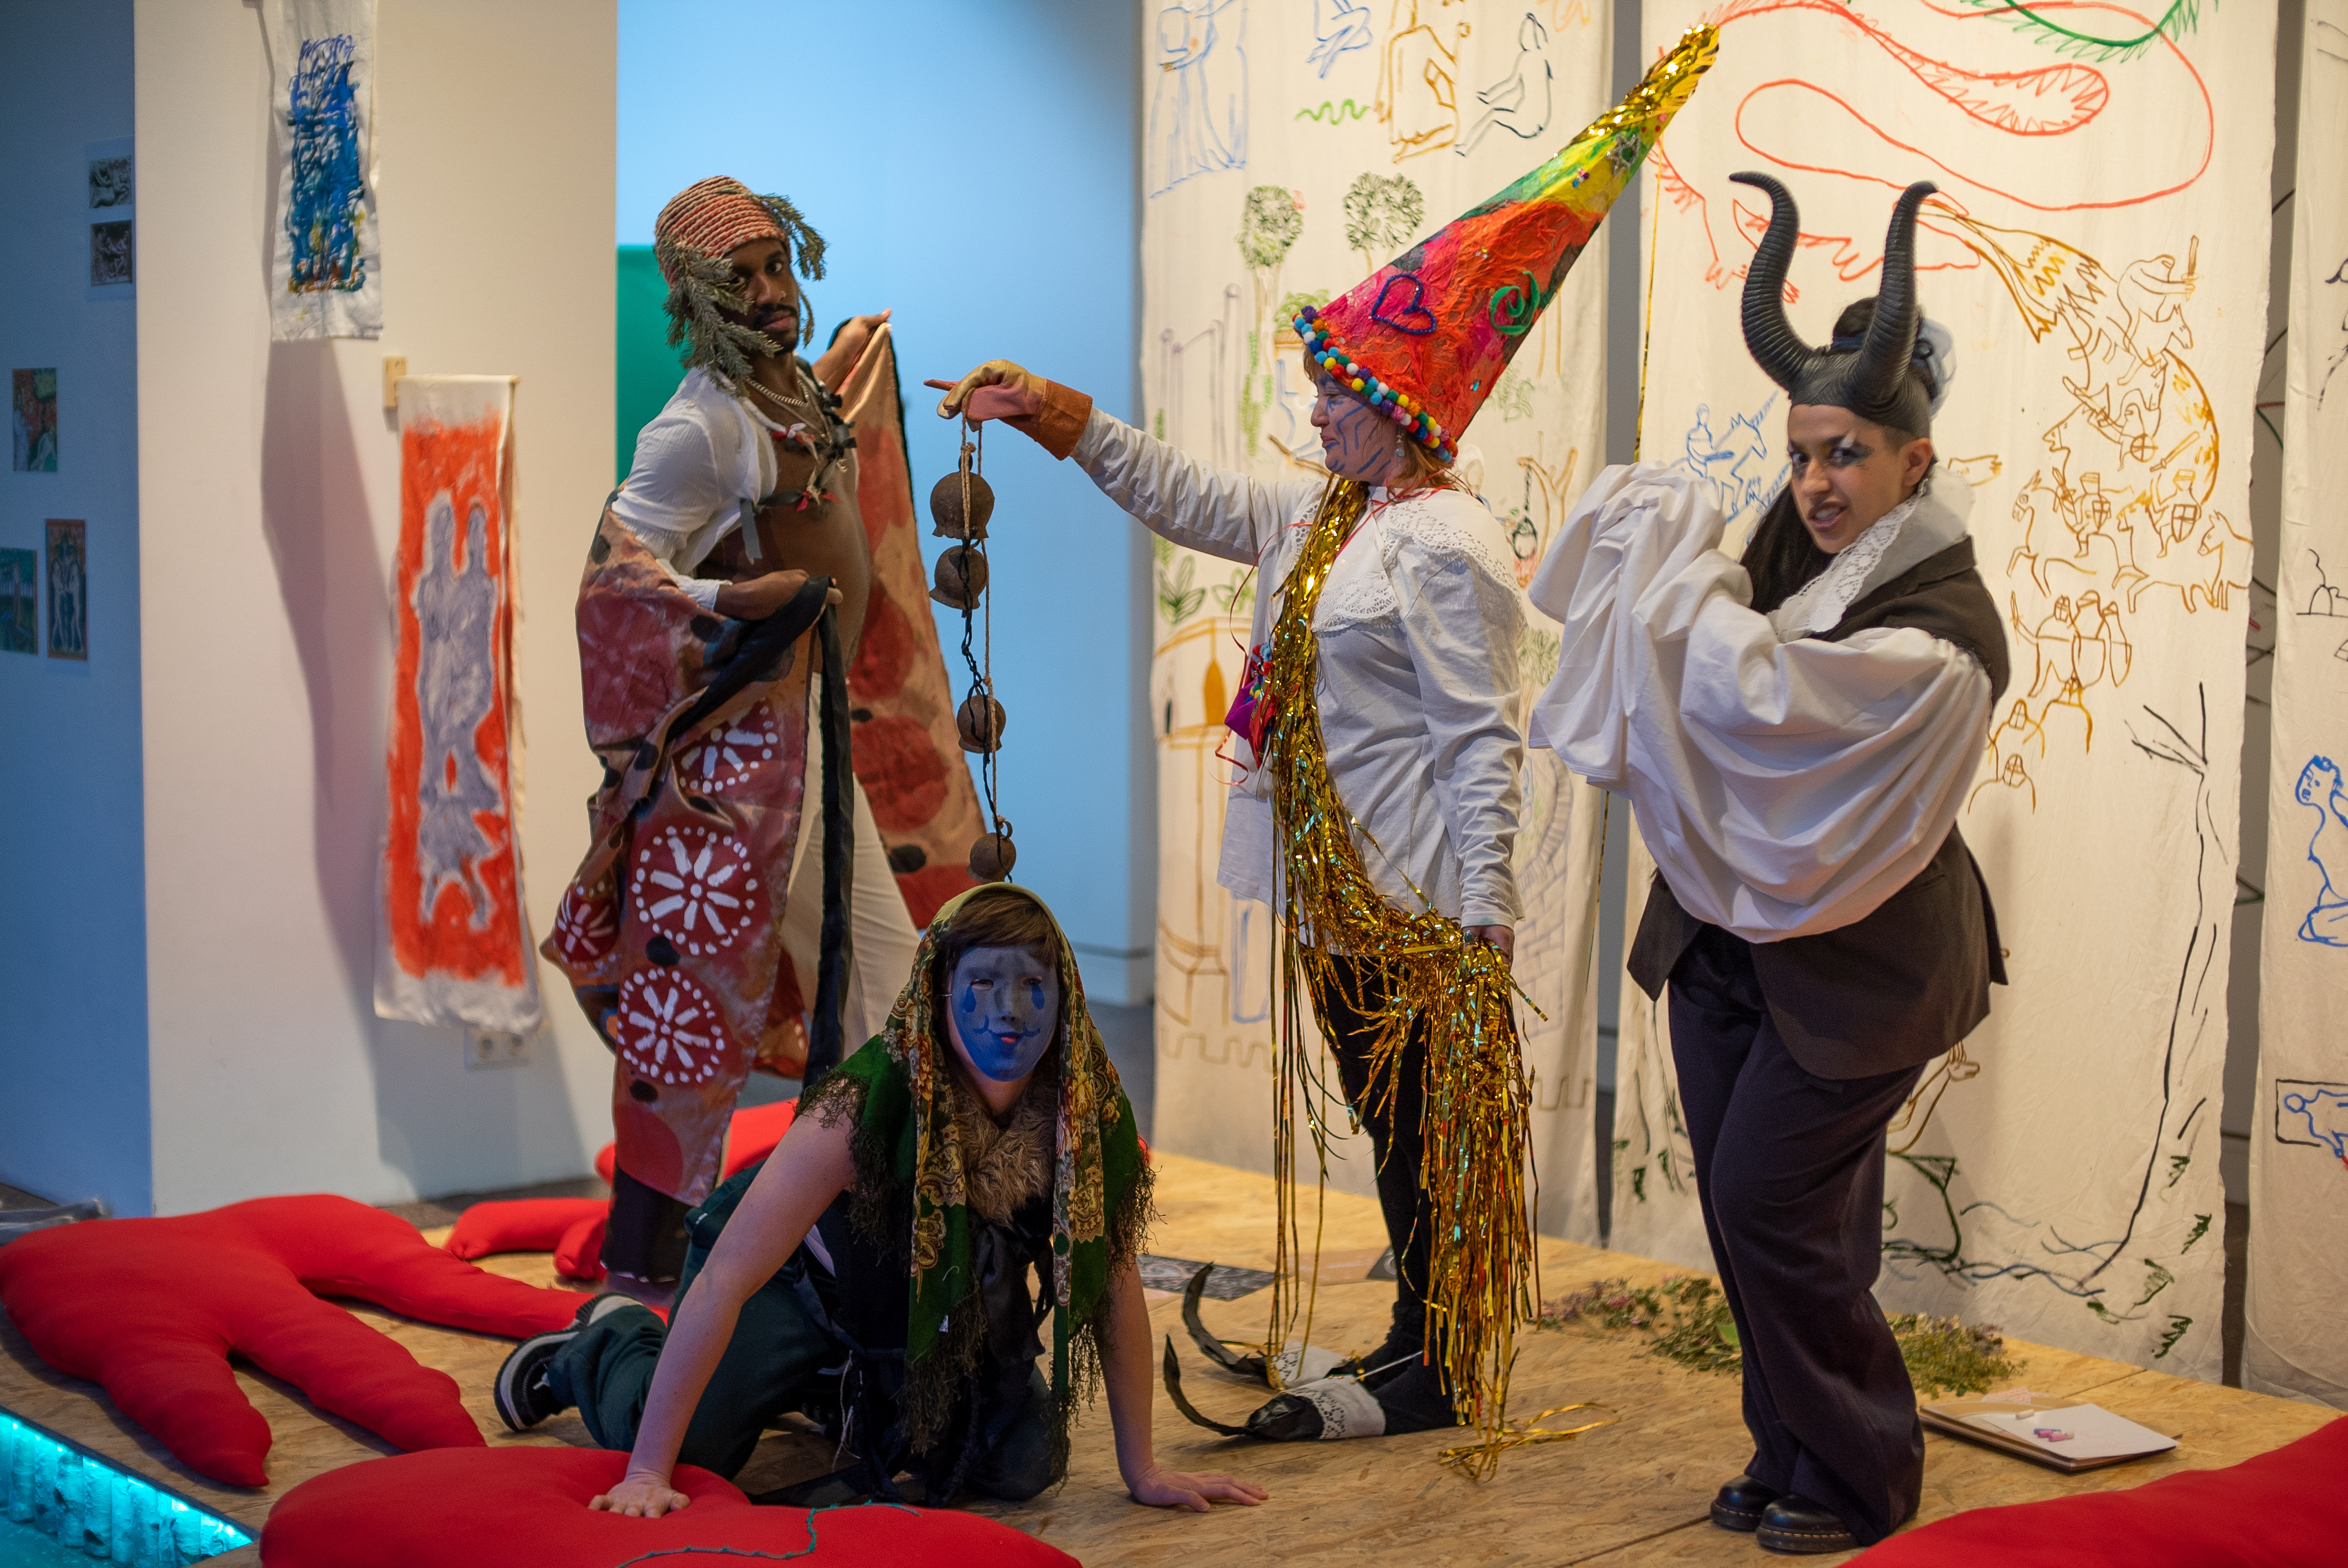 The photo shows four people on a stage in imaginative medieval costumes. Three persons pose standing, the fourth kneels on the floor in front. In the background we see three banners made of antique white fabric, which were painted by the artist Irene Fernandez Arcas with figures made of brushstrokes. On the floor of the stage are several large red cushions in figurative shapes.